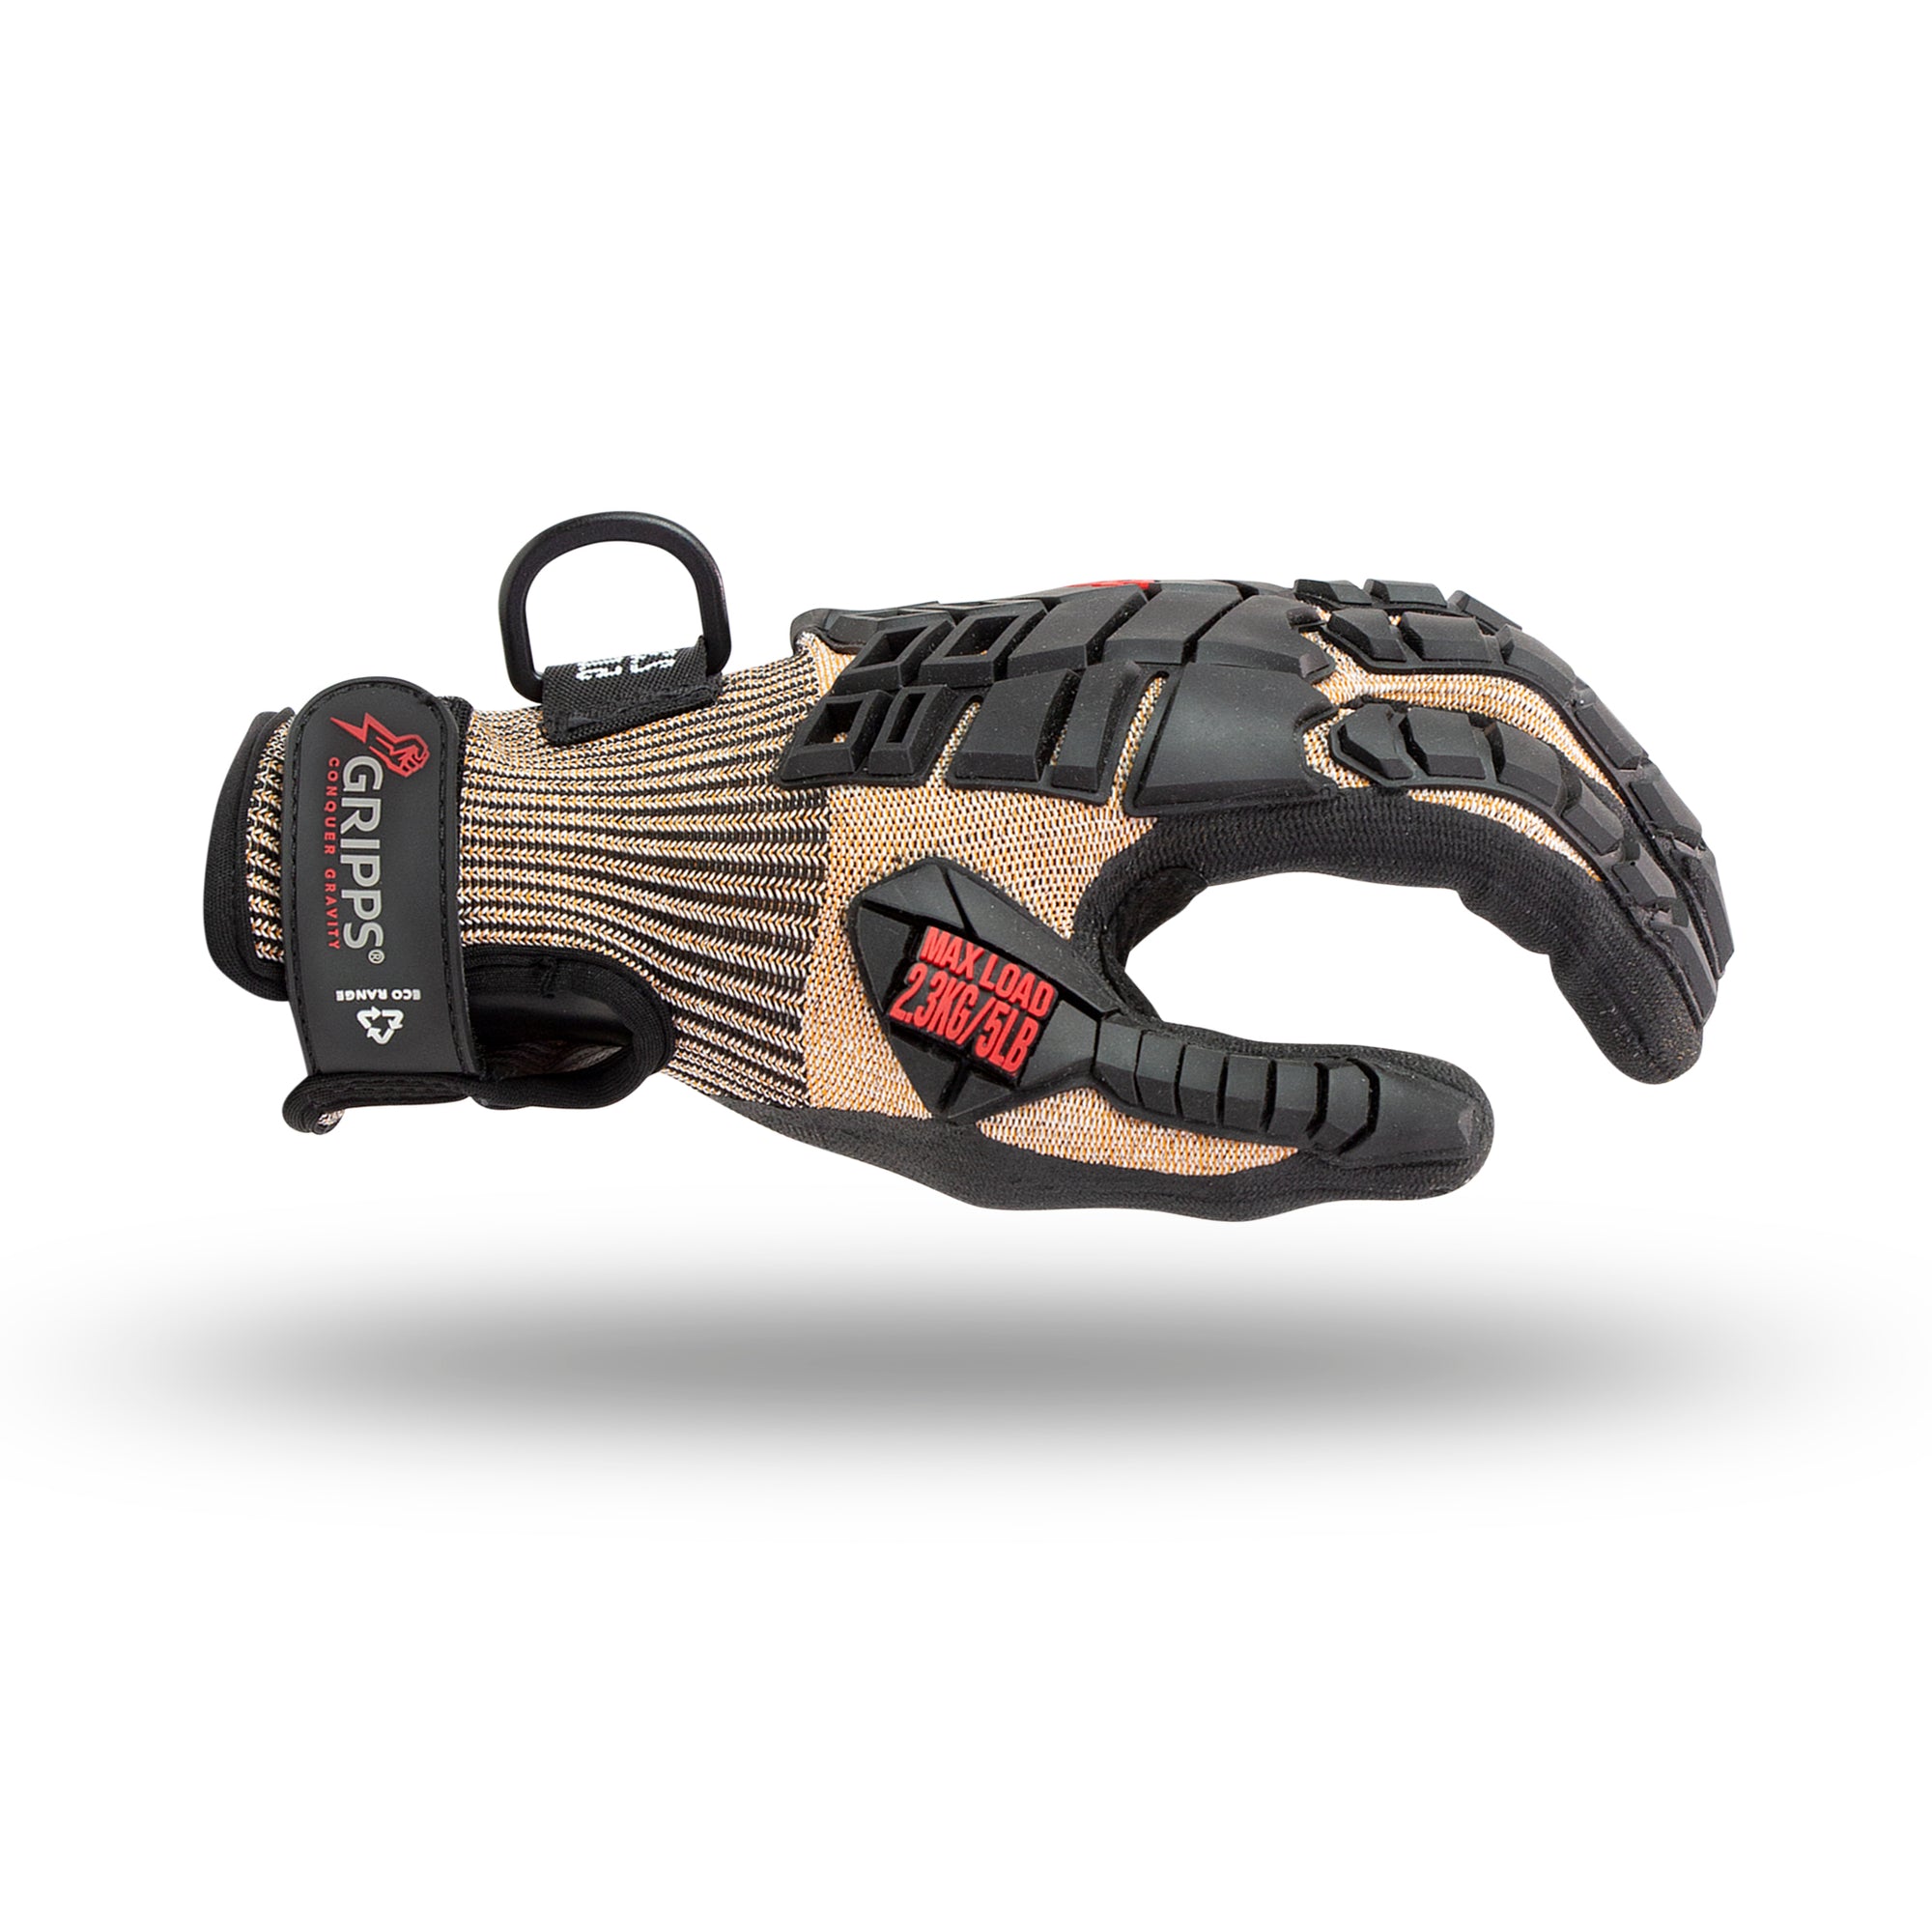 Gripps C5 Eco A5 Impact Gloves from Columbia Safety